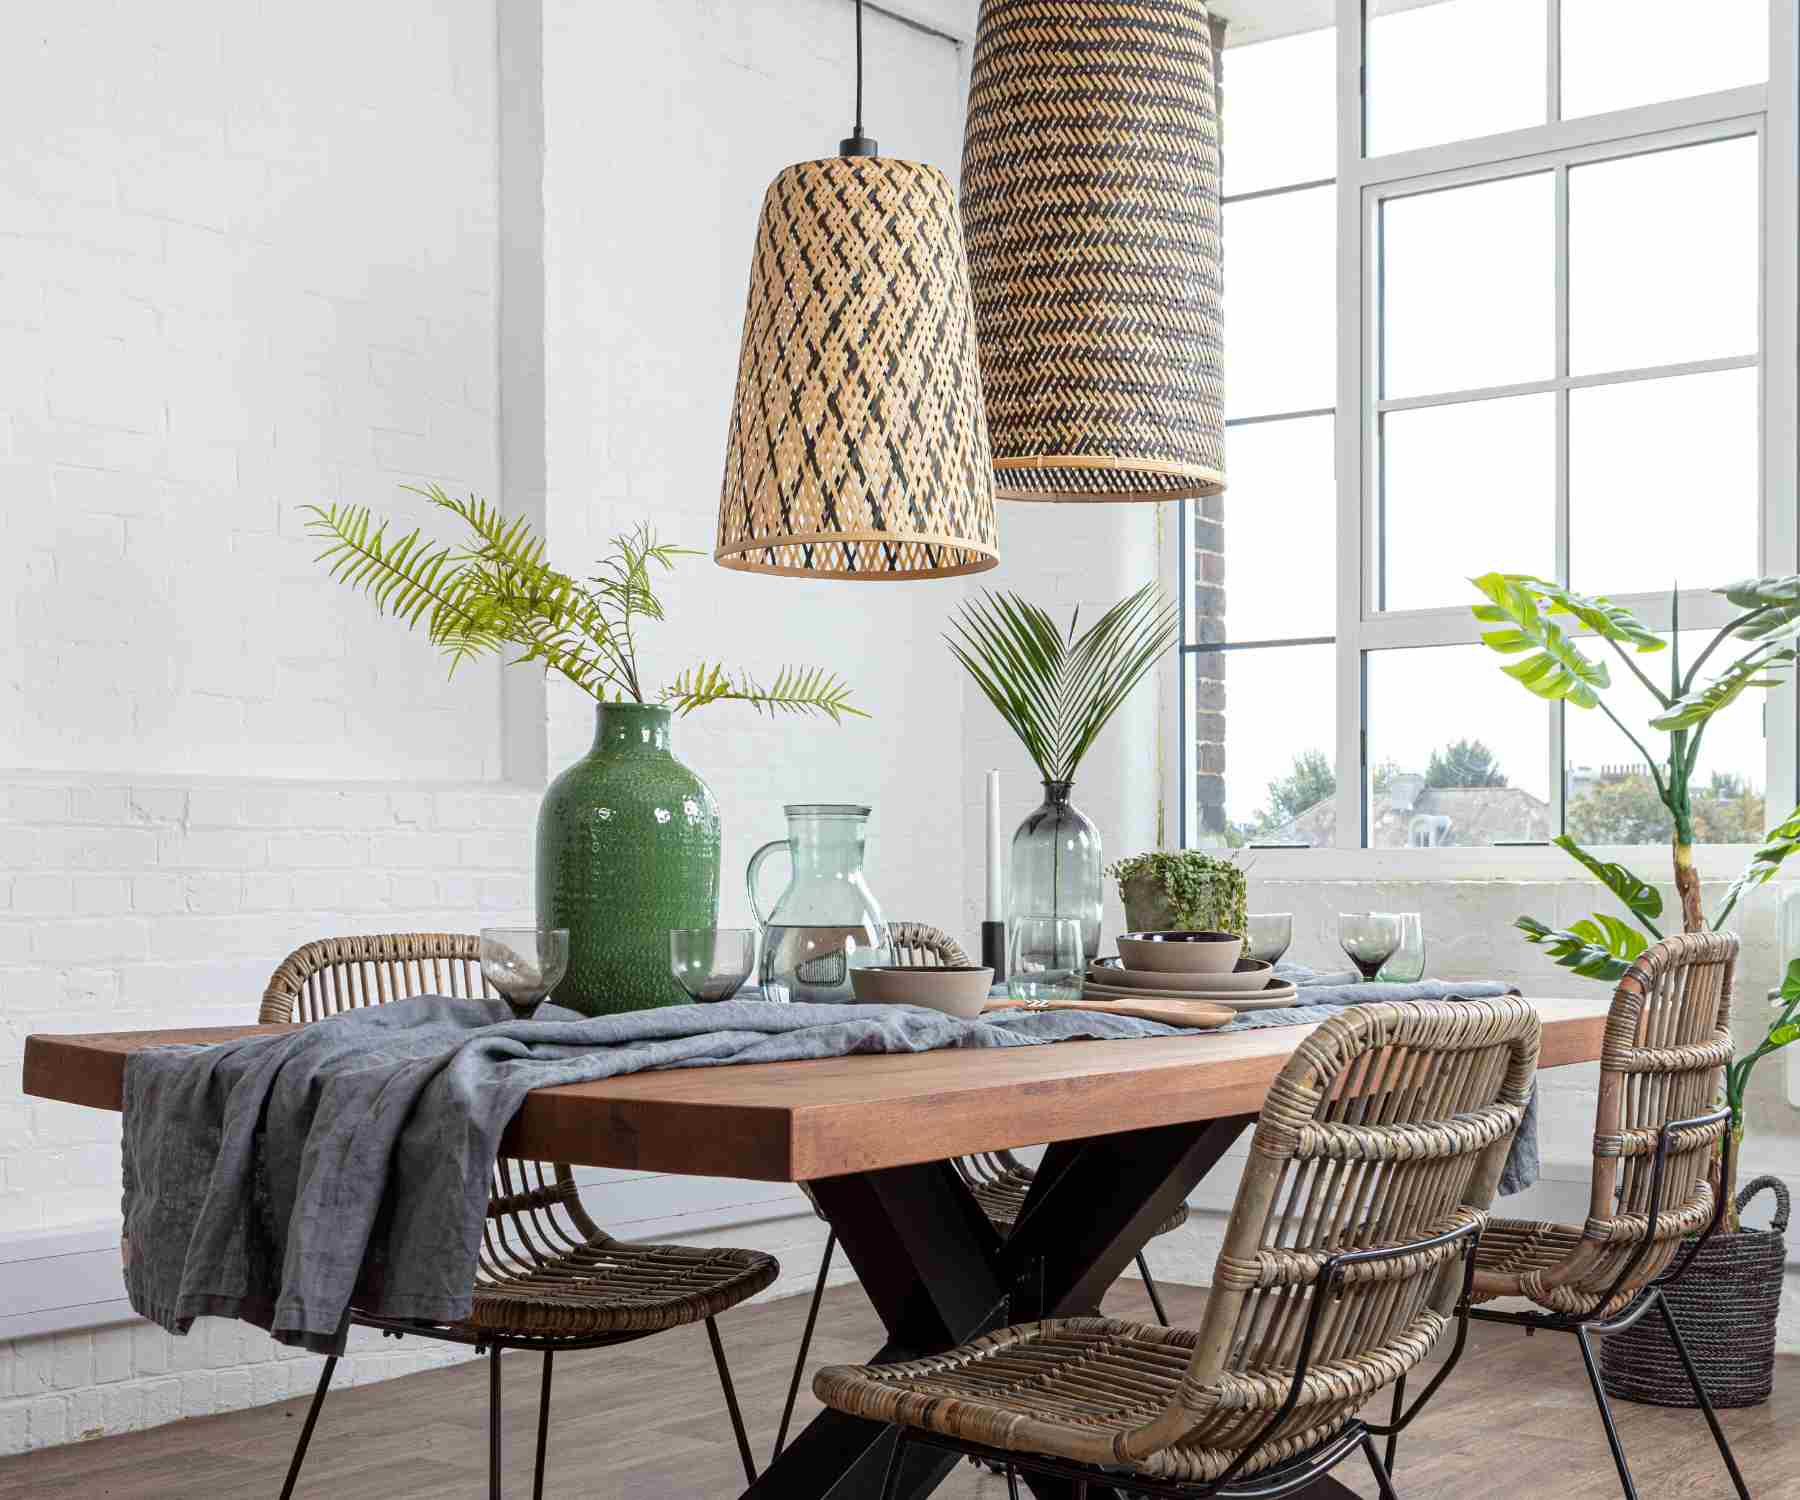 Two bamboo hanging pendant lights above an industrial dining table